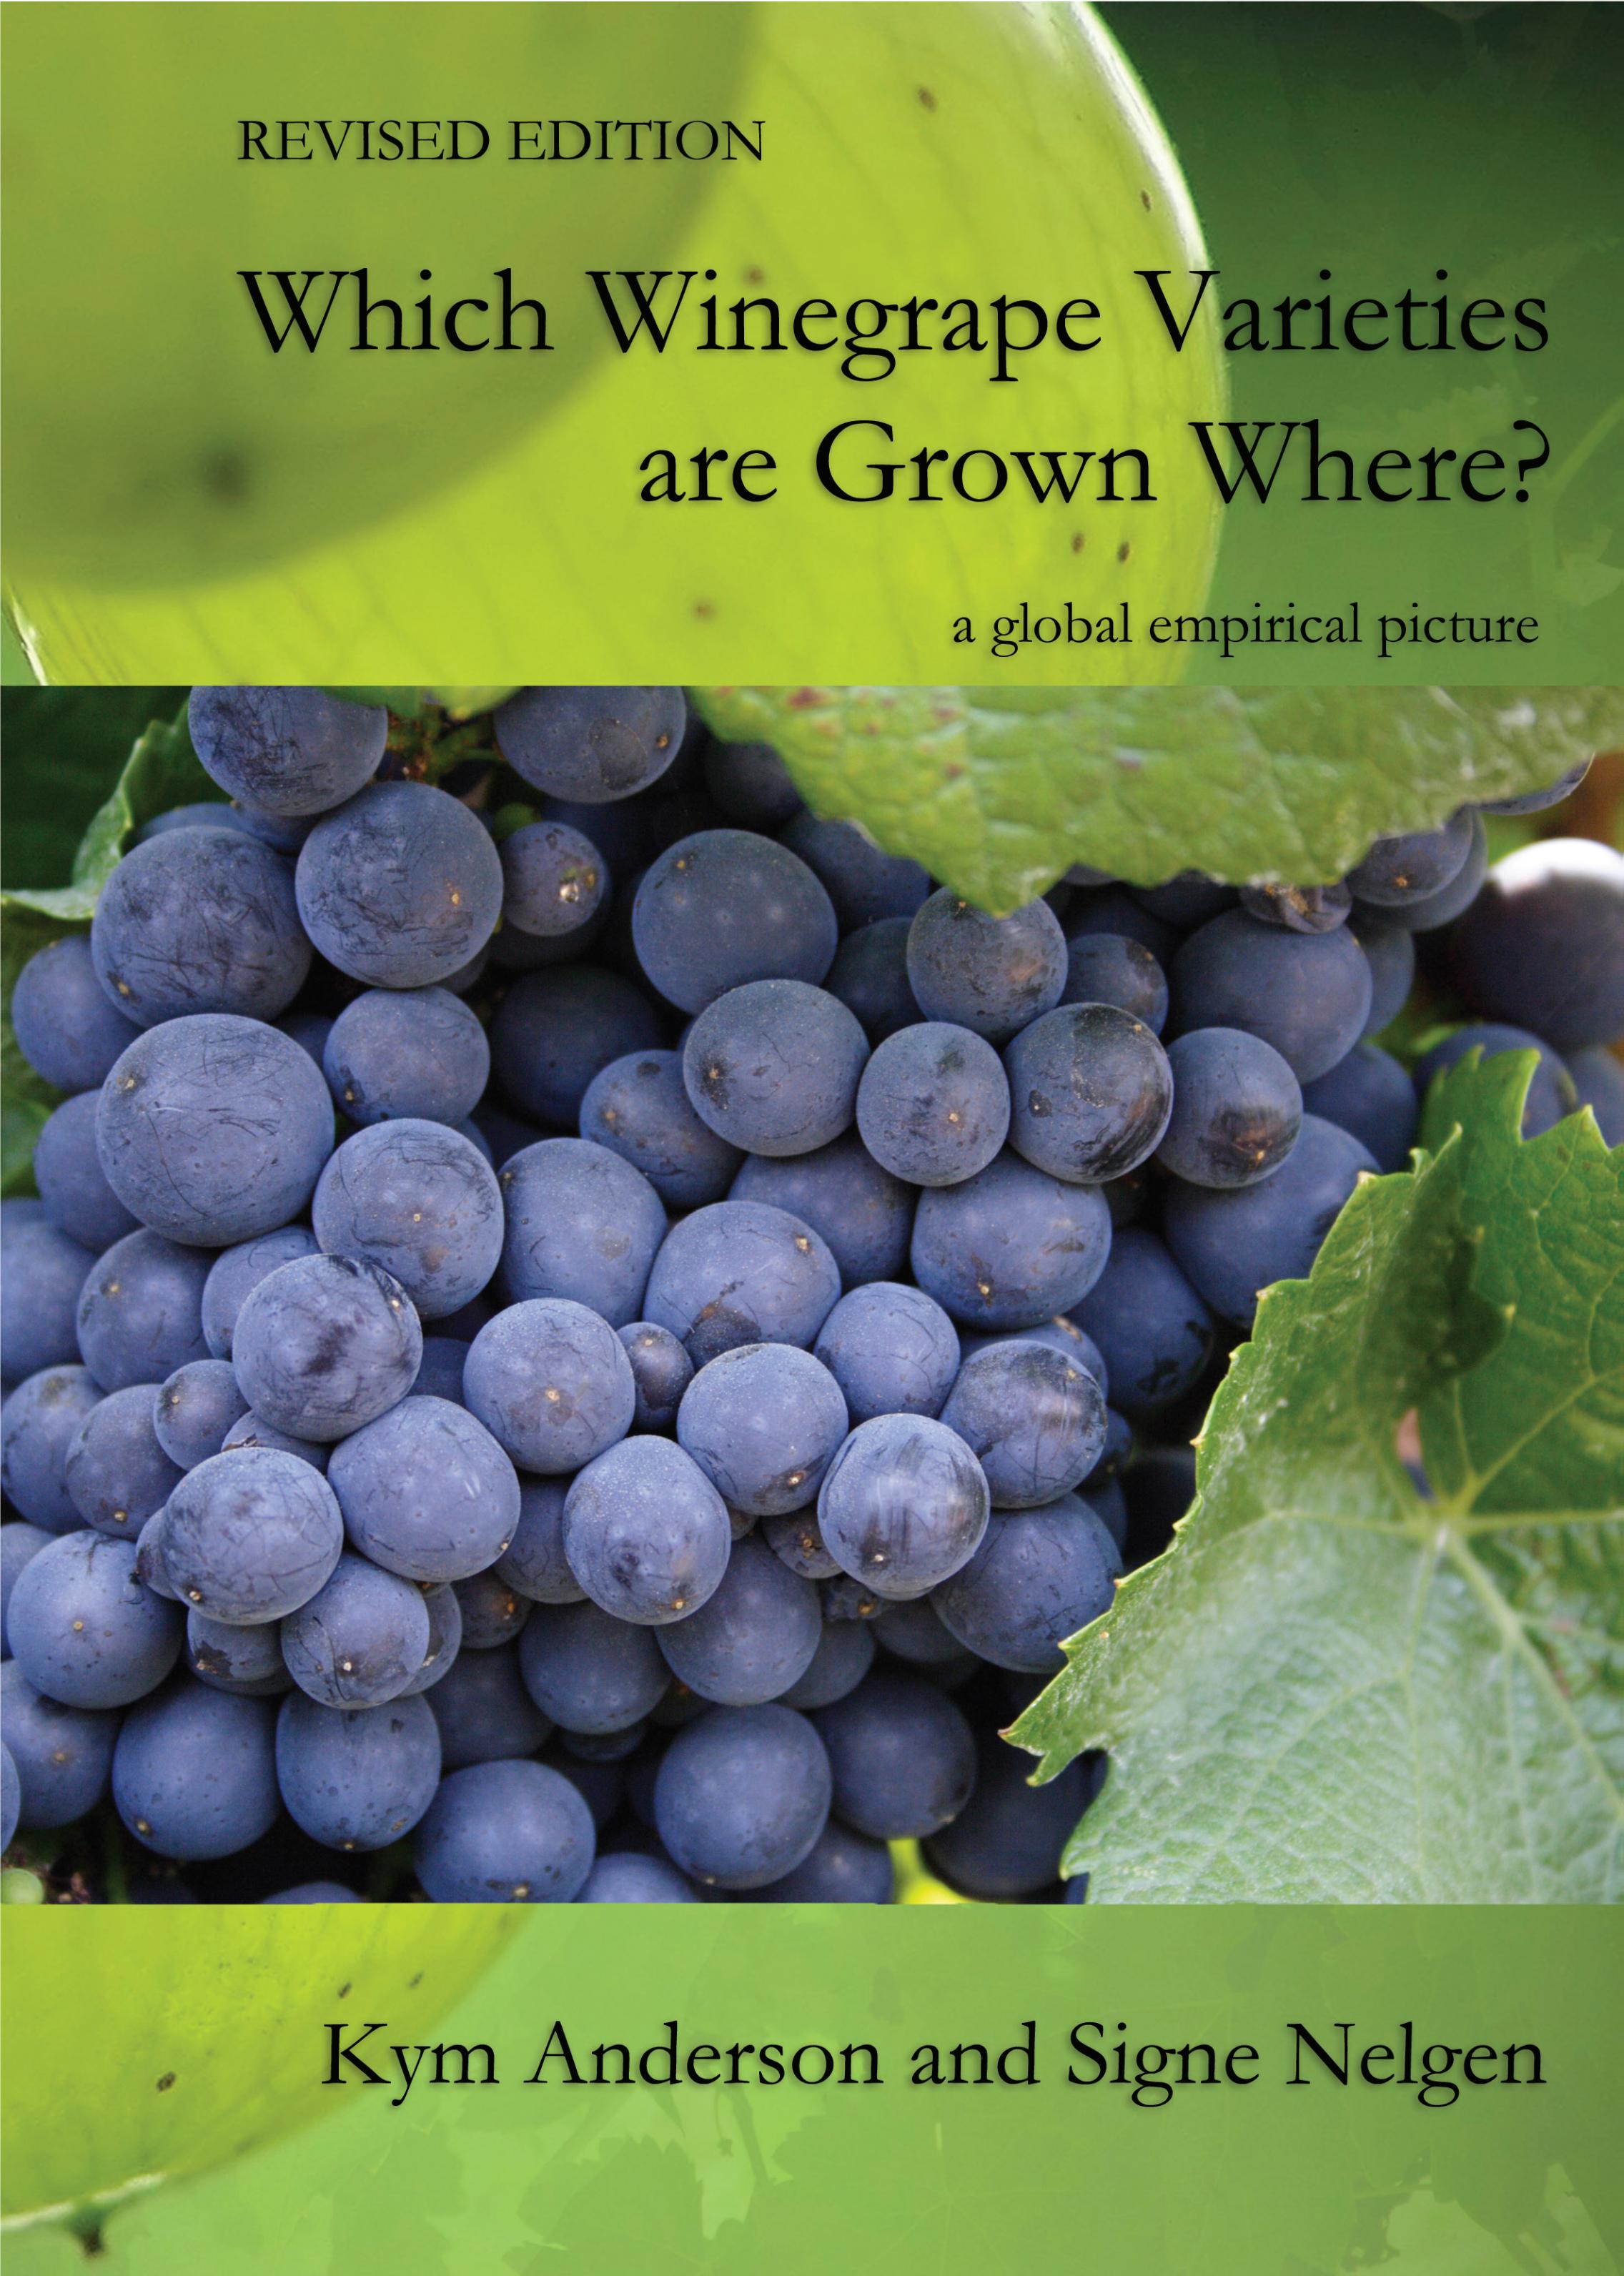 Cover of wine book